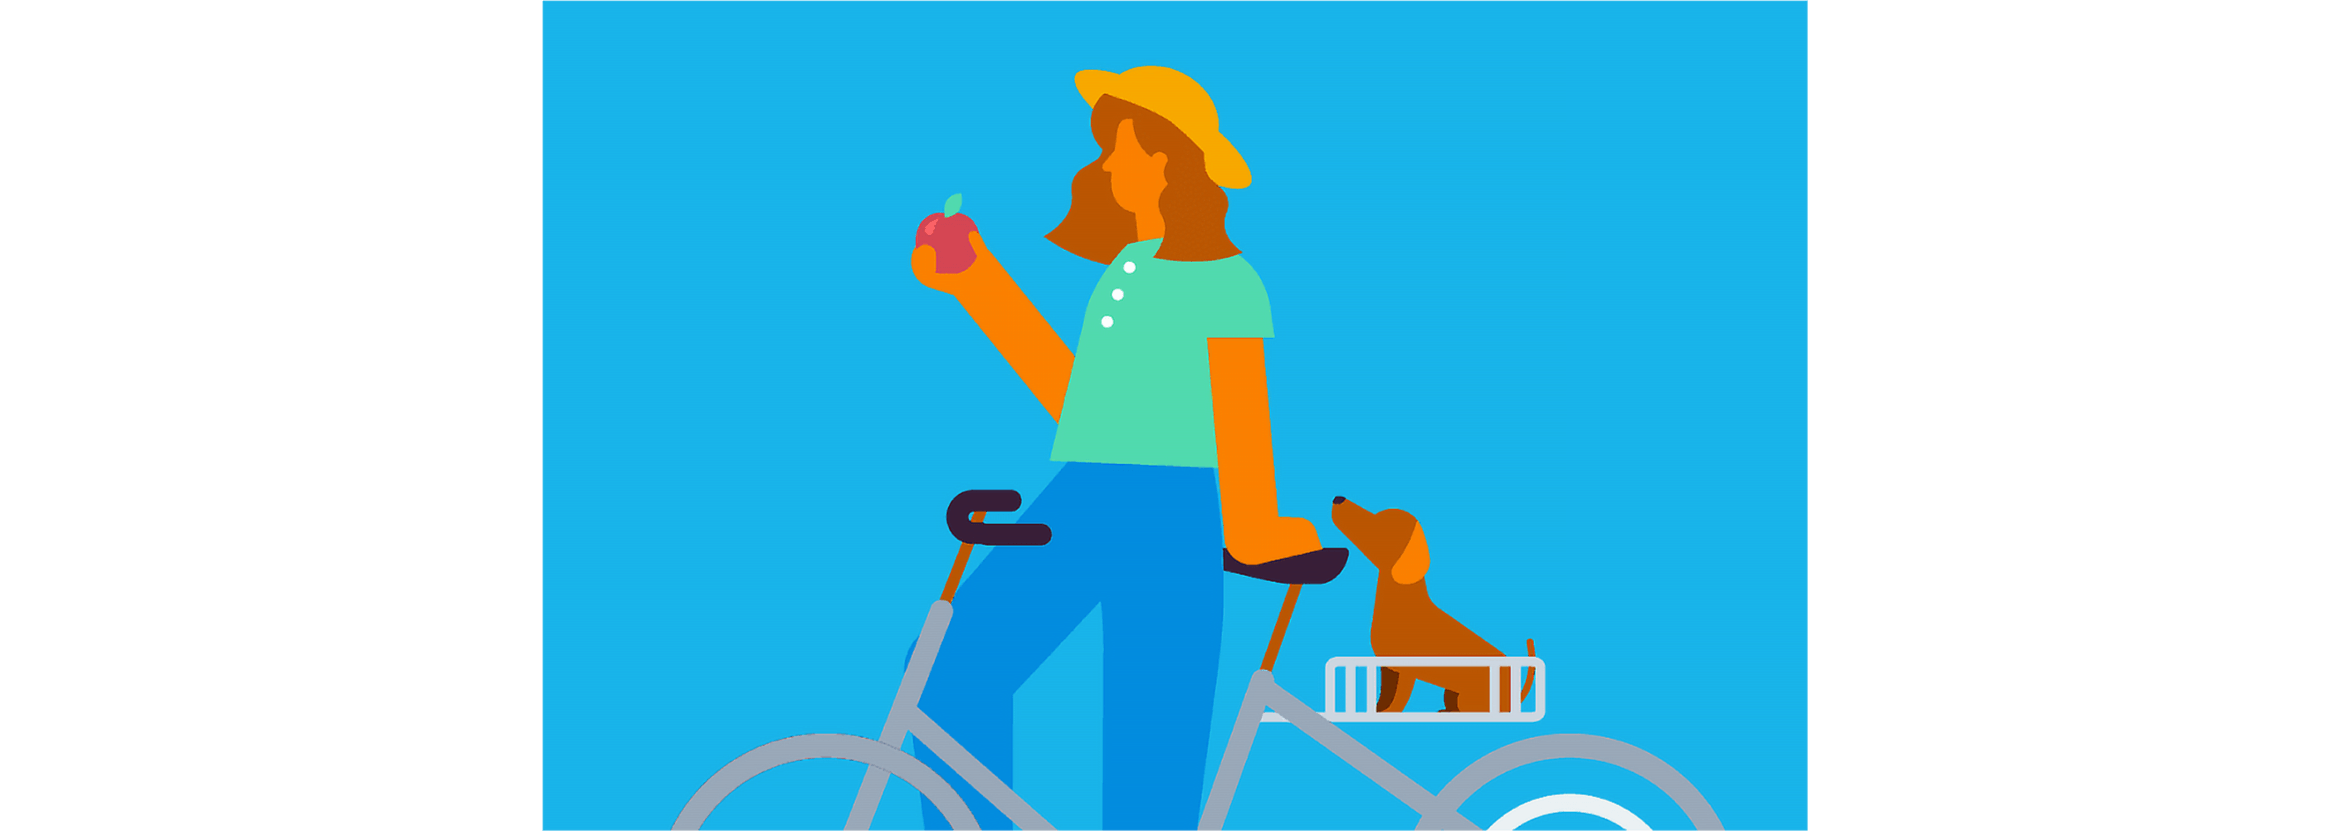 A person stands beside their bike eating an apple with their dog in a basket beside them.